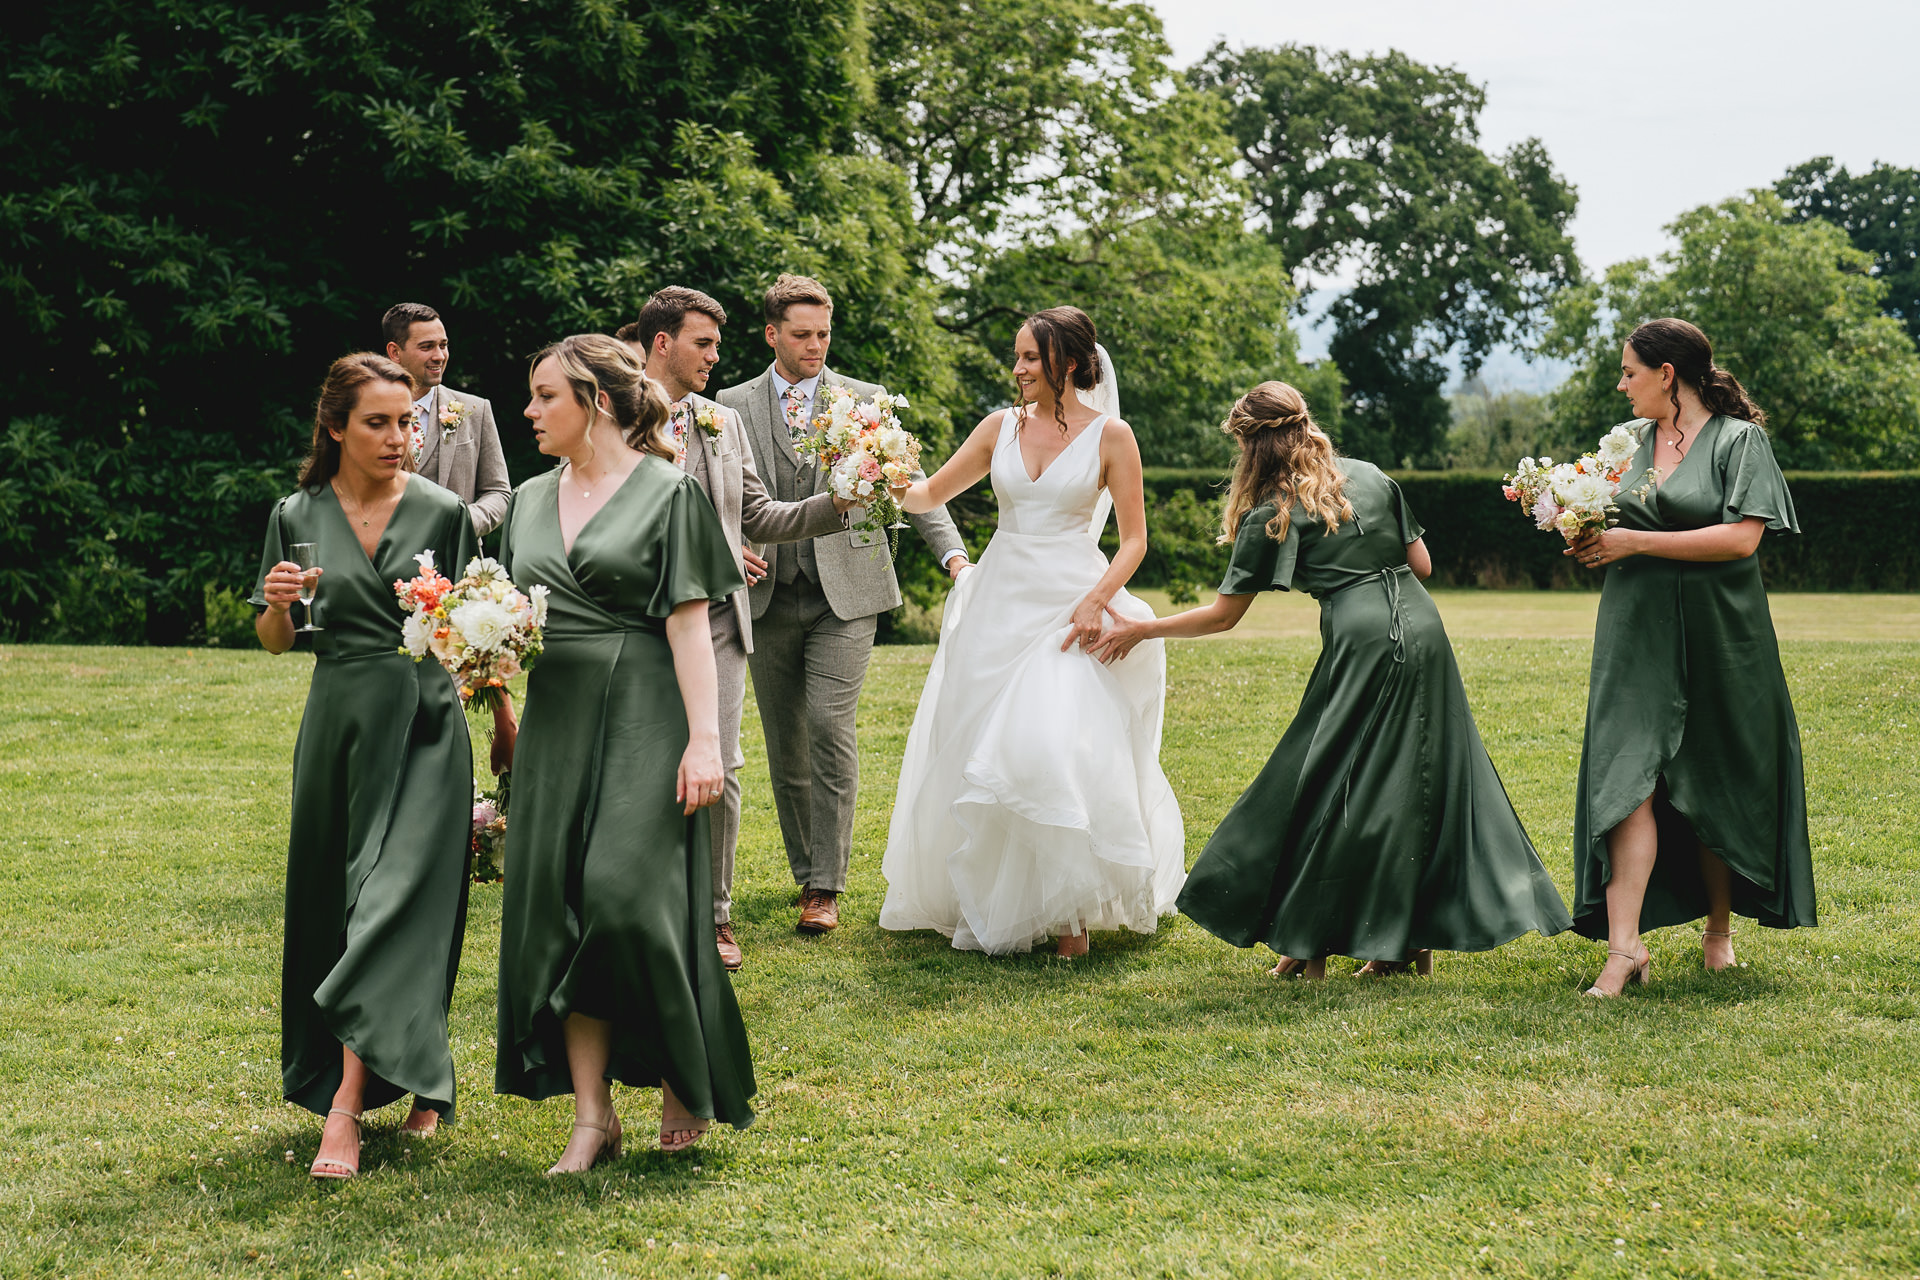 A bride and groom walking across a grass lawn with their wedding party